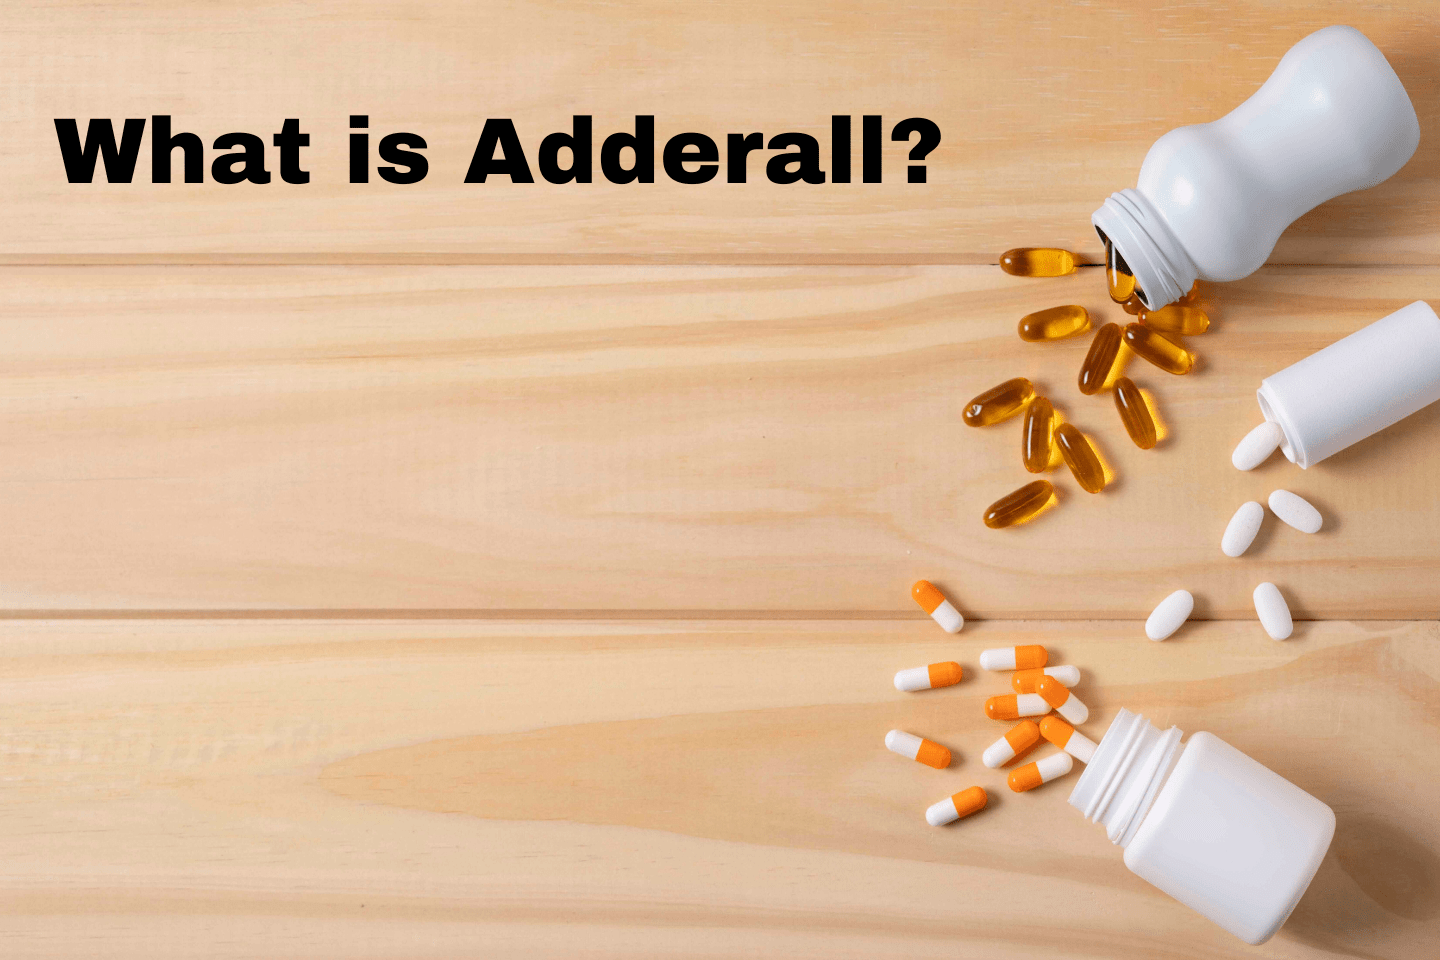 What is Adderall?